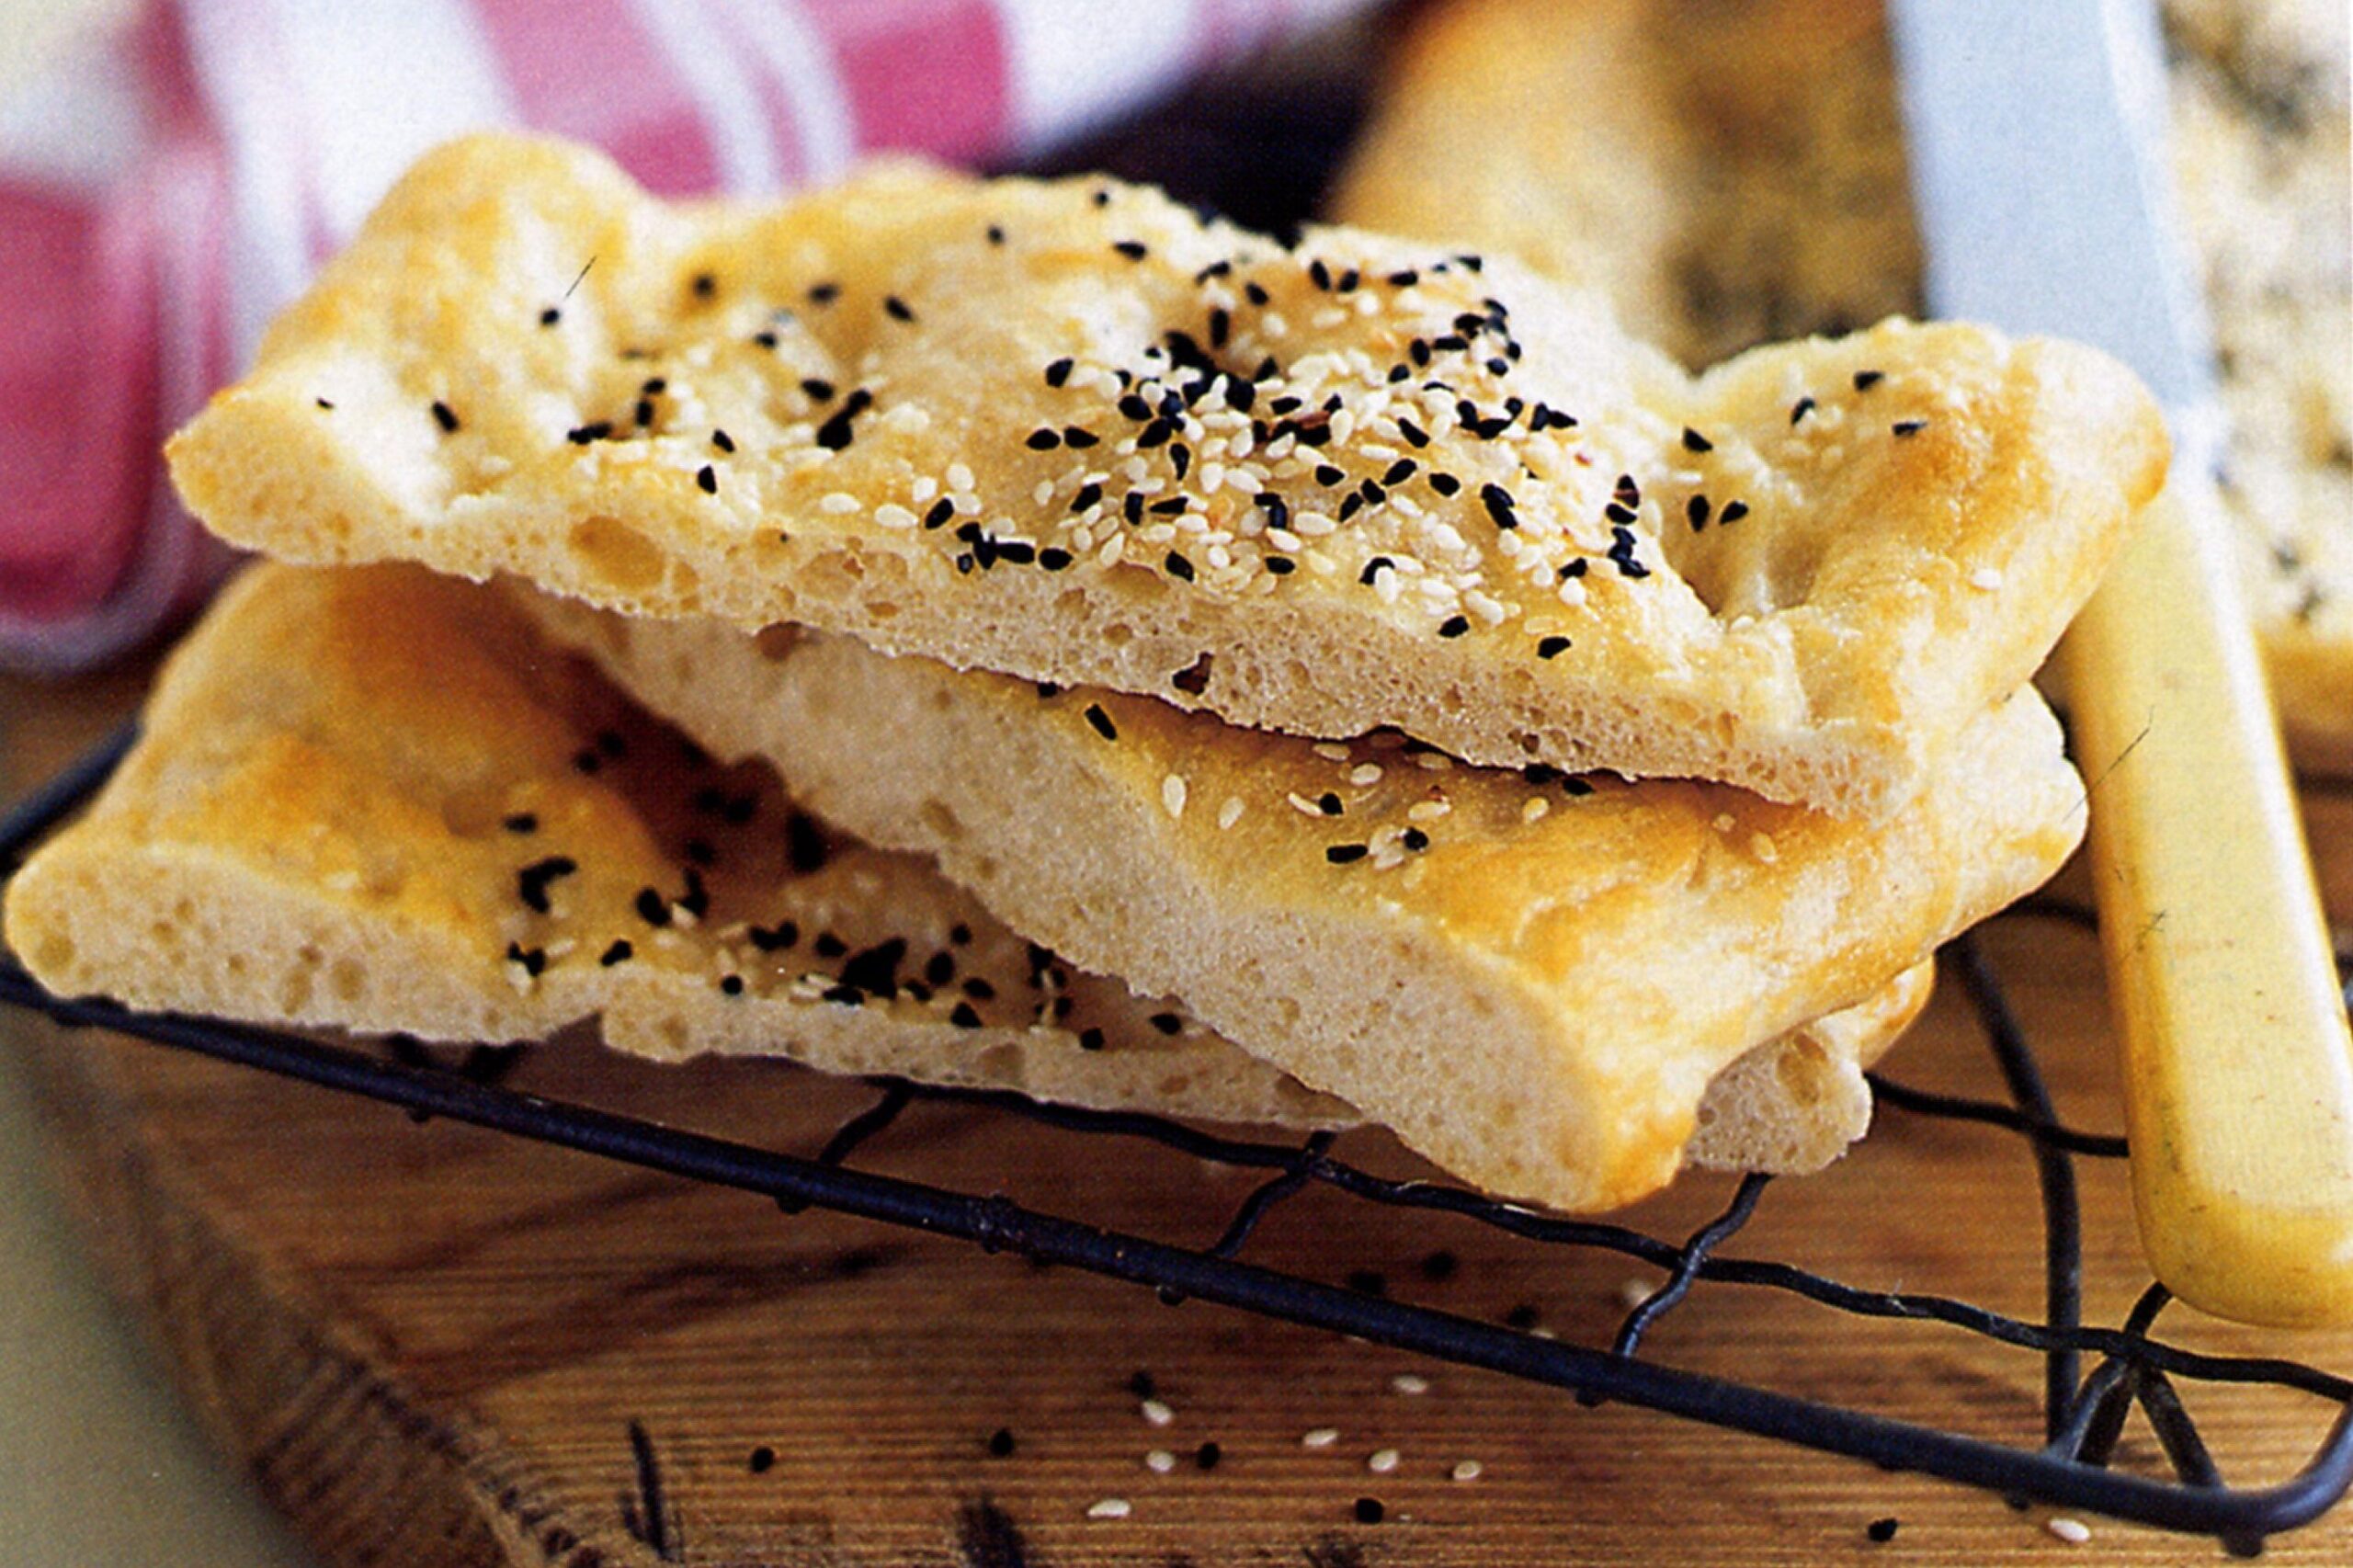  The perfect bread for dipping into soups and stews.